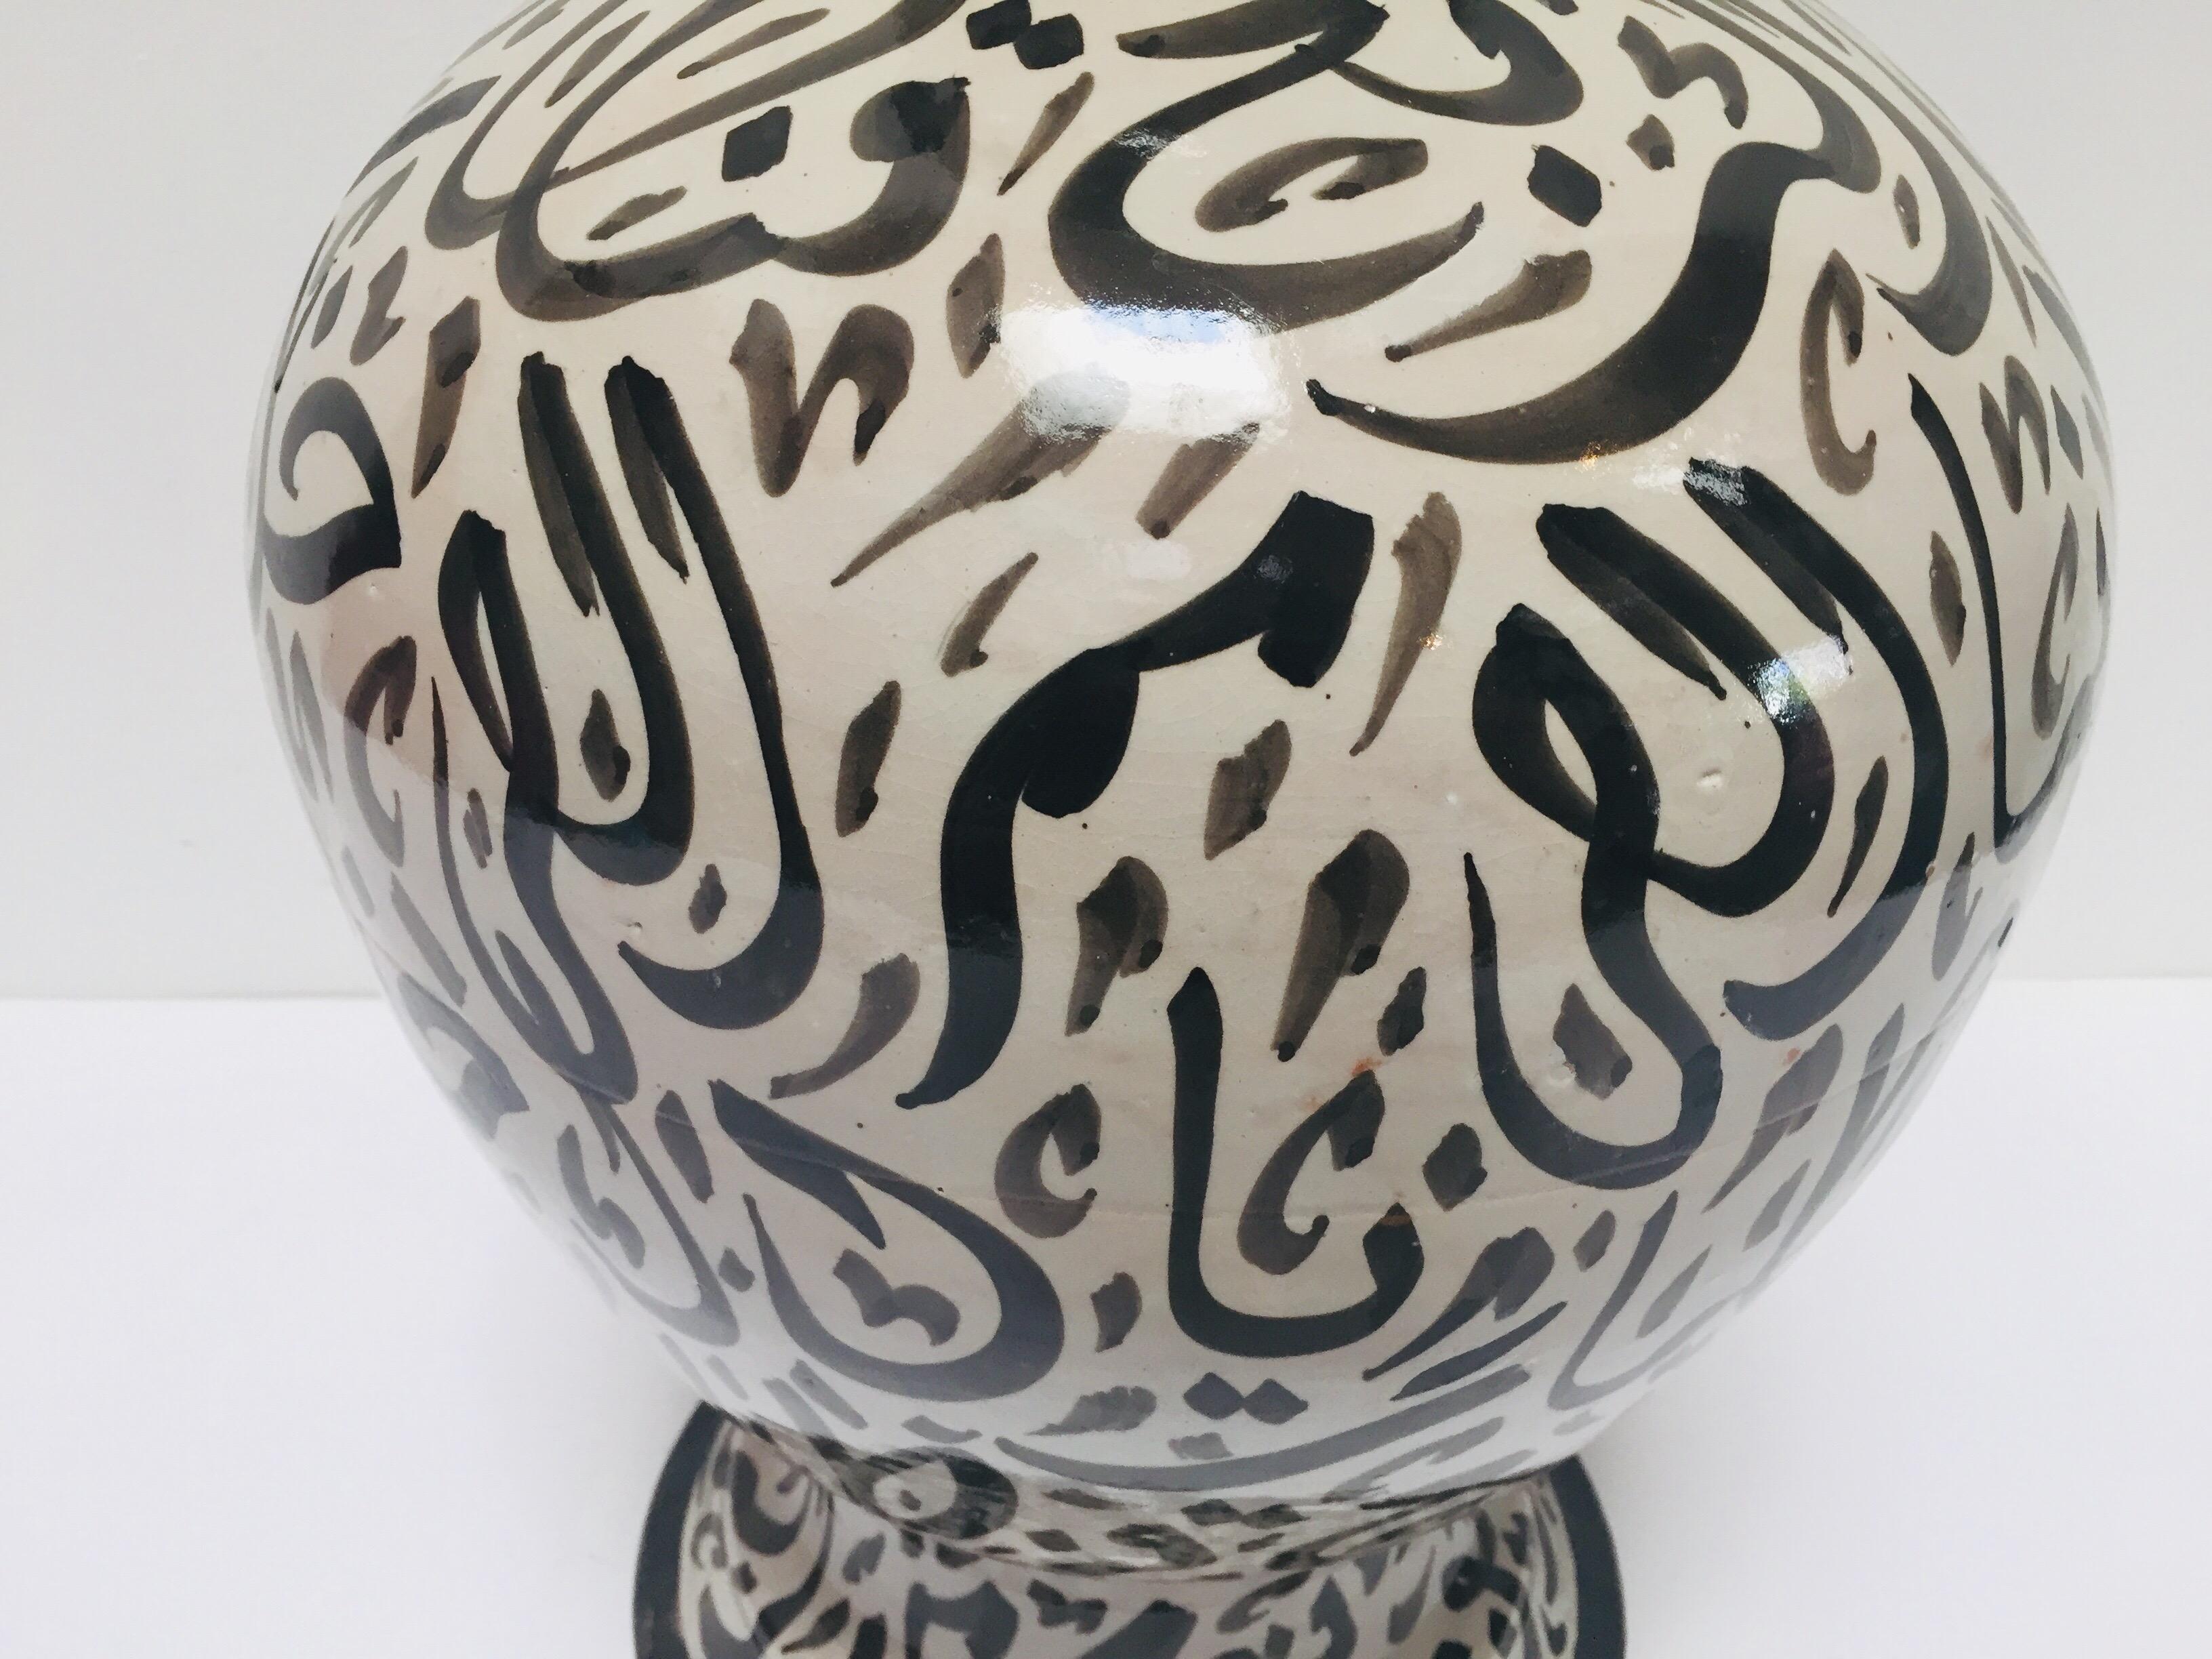 Large Moroccan Glazed Ceramic Vase with Arabic Calligraphy Brown Writing, Fez 2